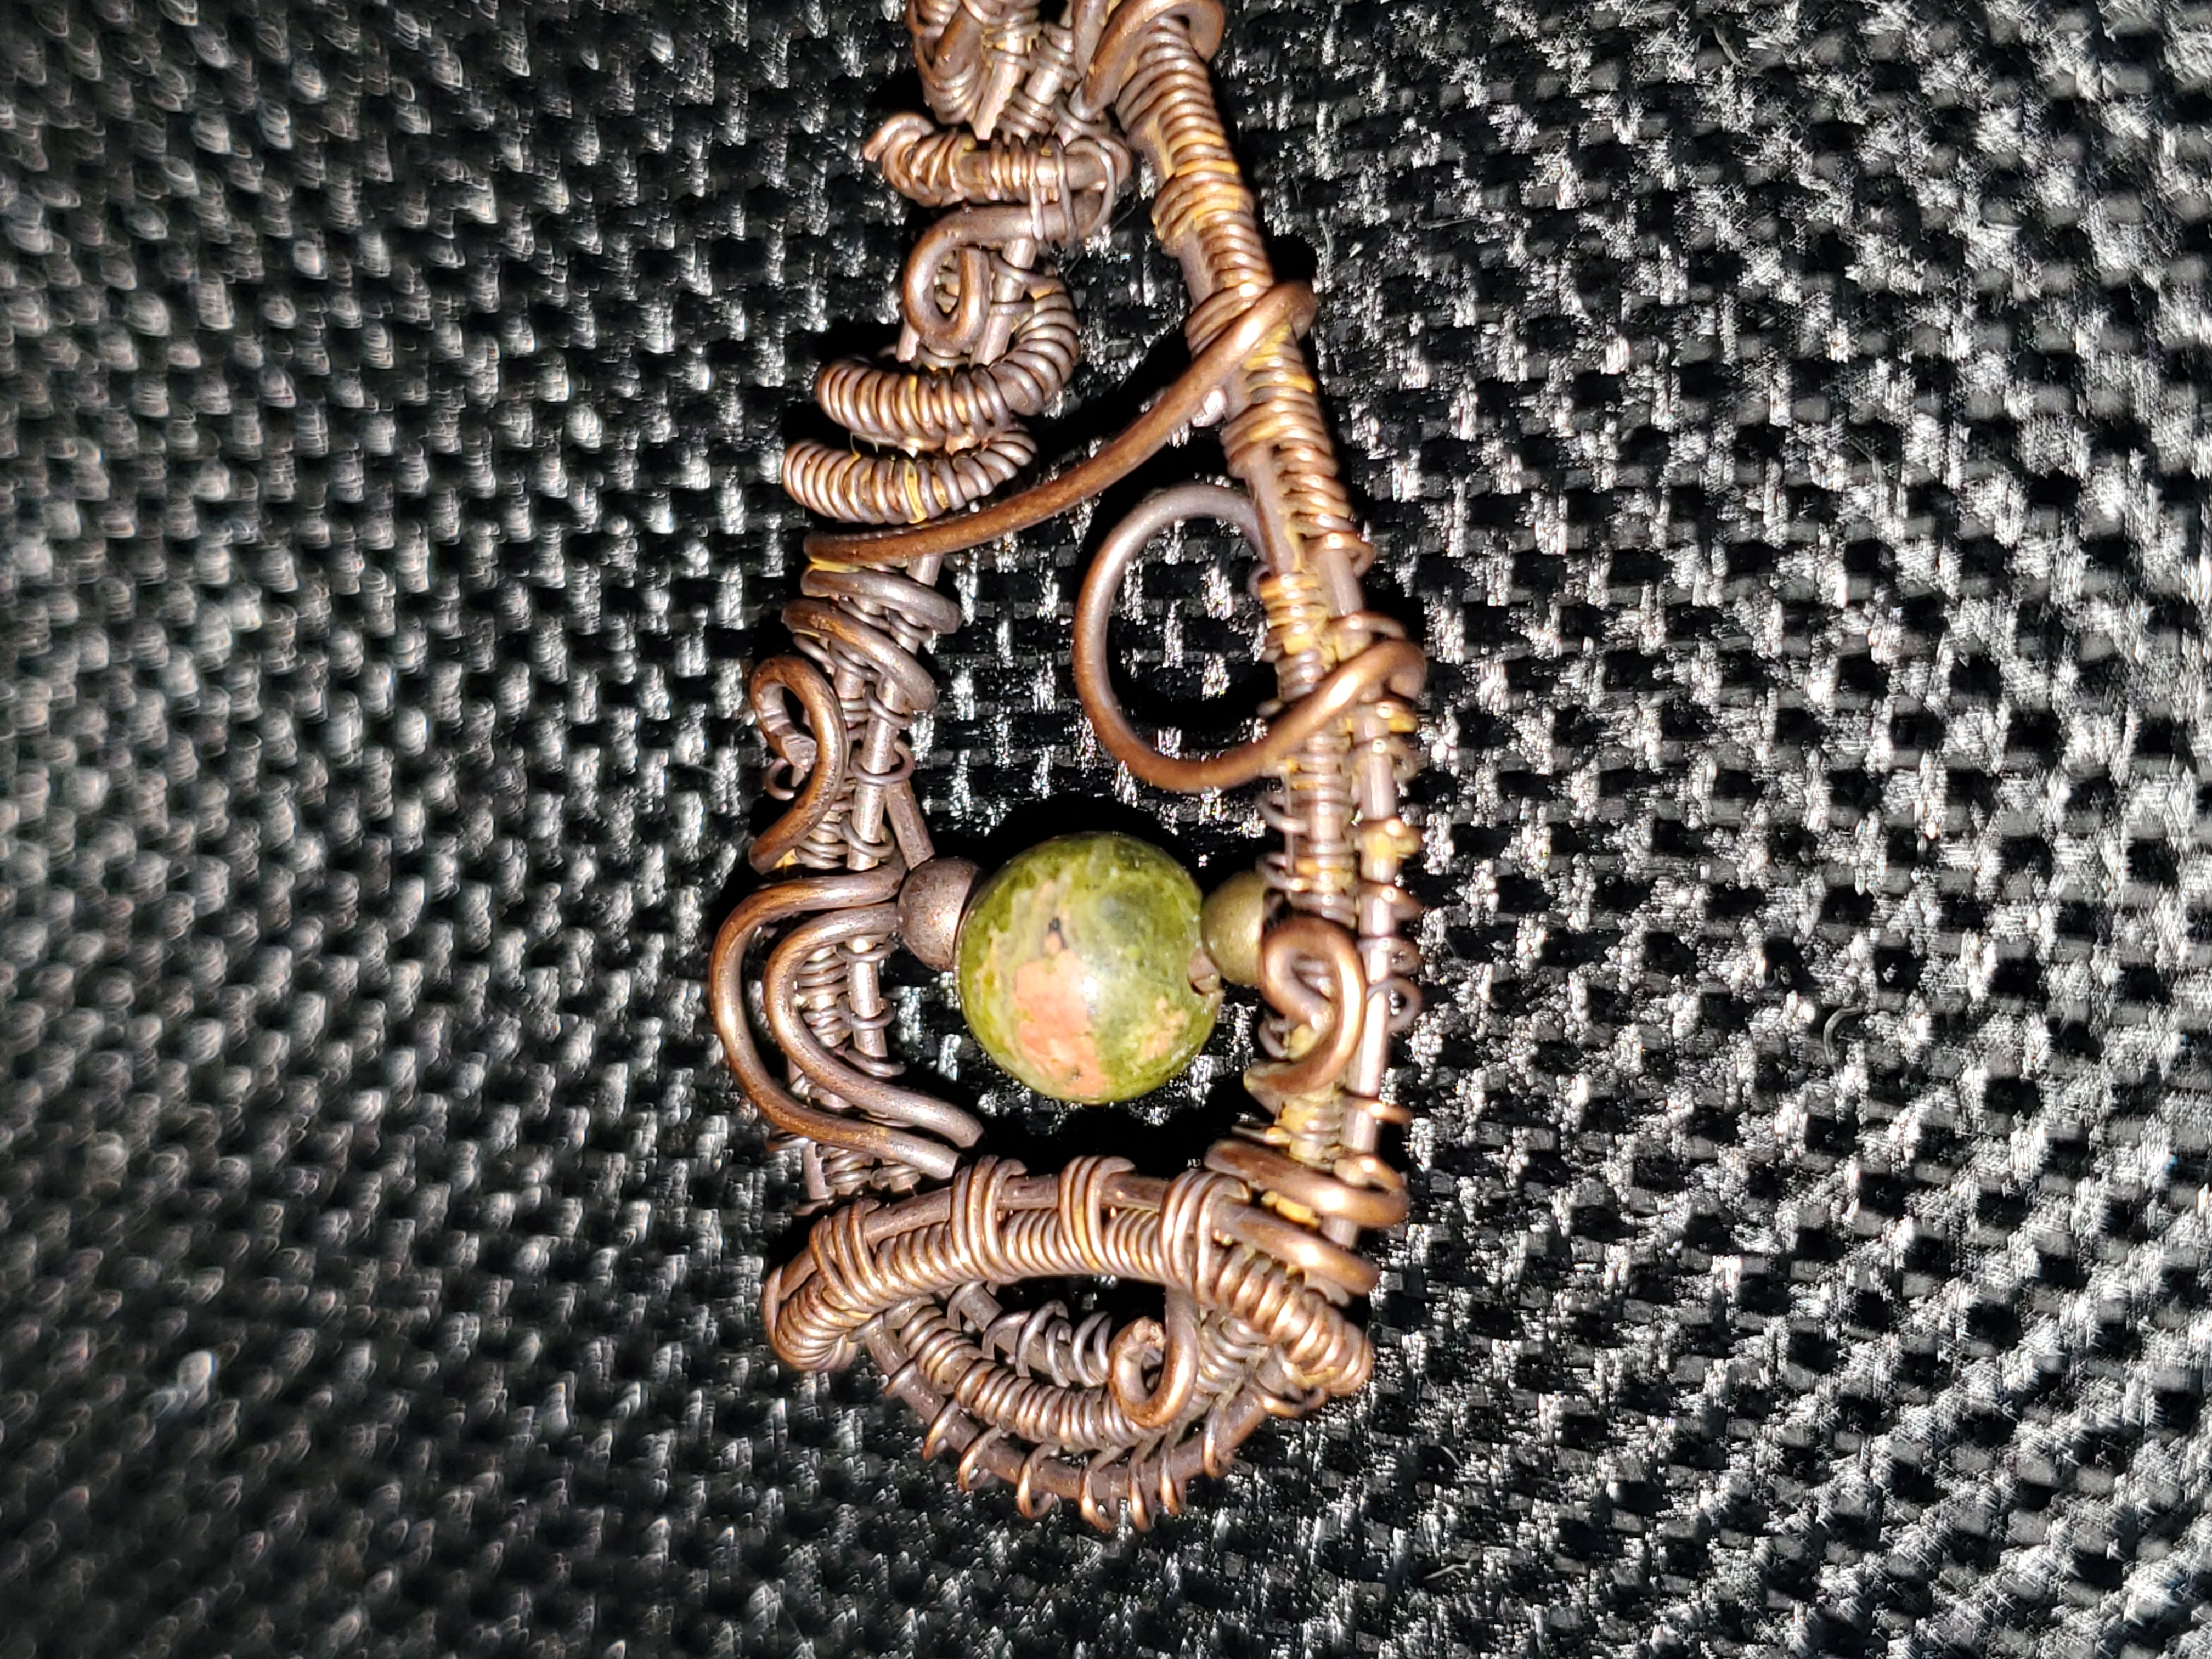 Eukanite, eukanite jewelry, eukanite necklace, charm, pendant, amulet, crystal, crystal jewely, stone, stone jewelry, wire, copper wire, wire wrapped, necklace, spiritual, healing, semi precious, art, handcrafted, unique gift, magical pendant